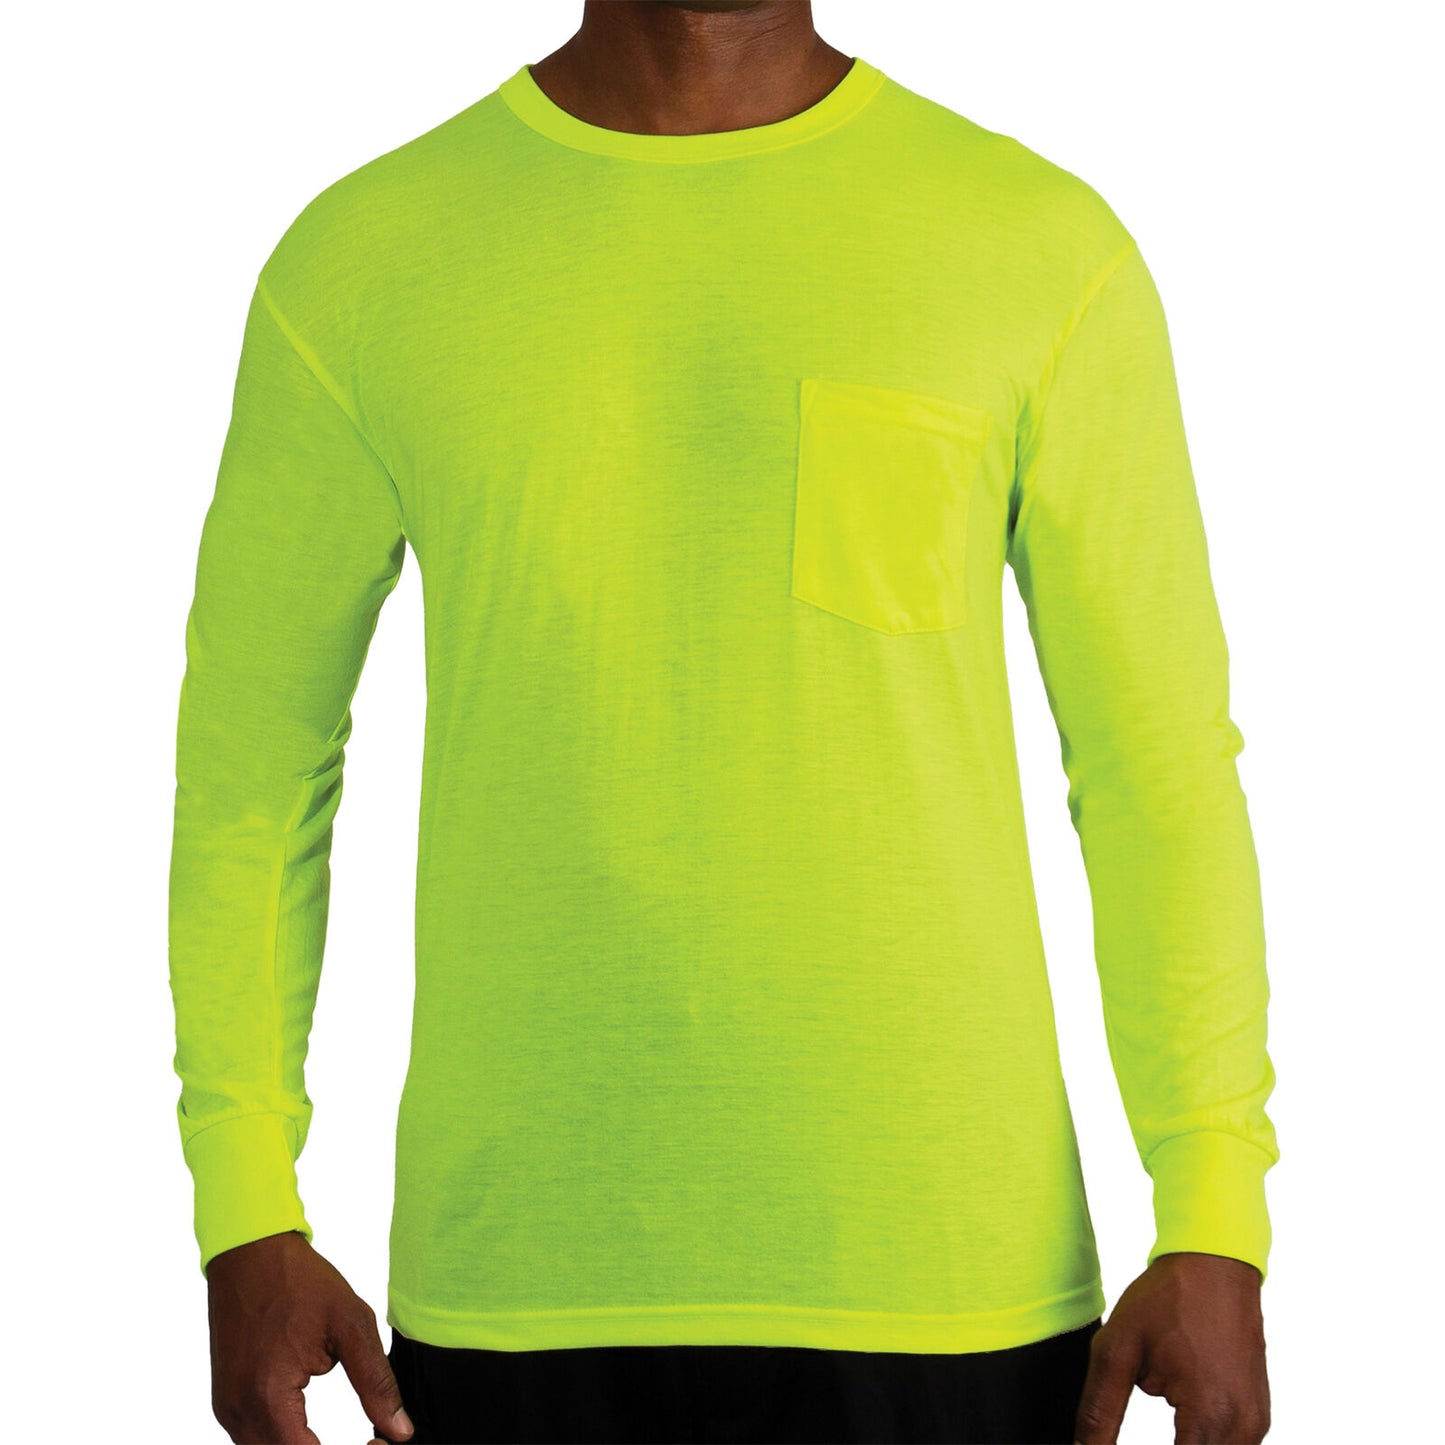 Men's Safety Green Moisture Wicking Long Sleeve T-Shirt with Chest Pocket